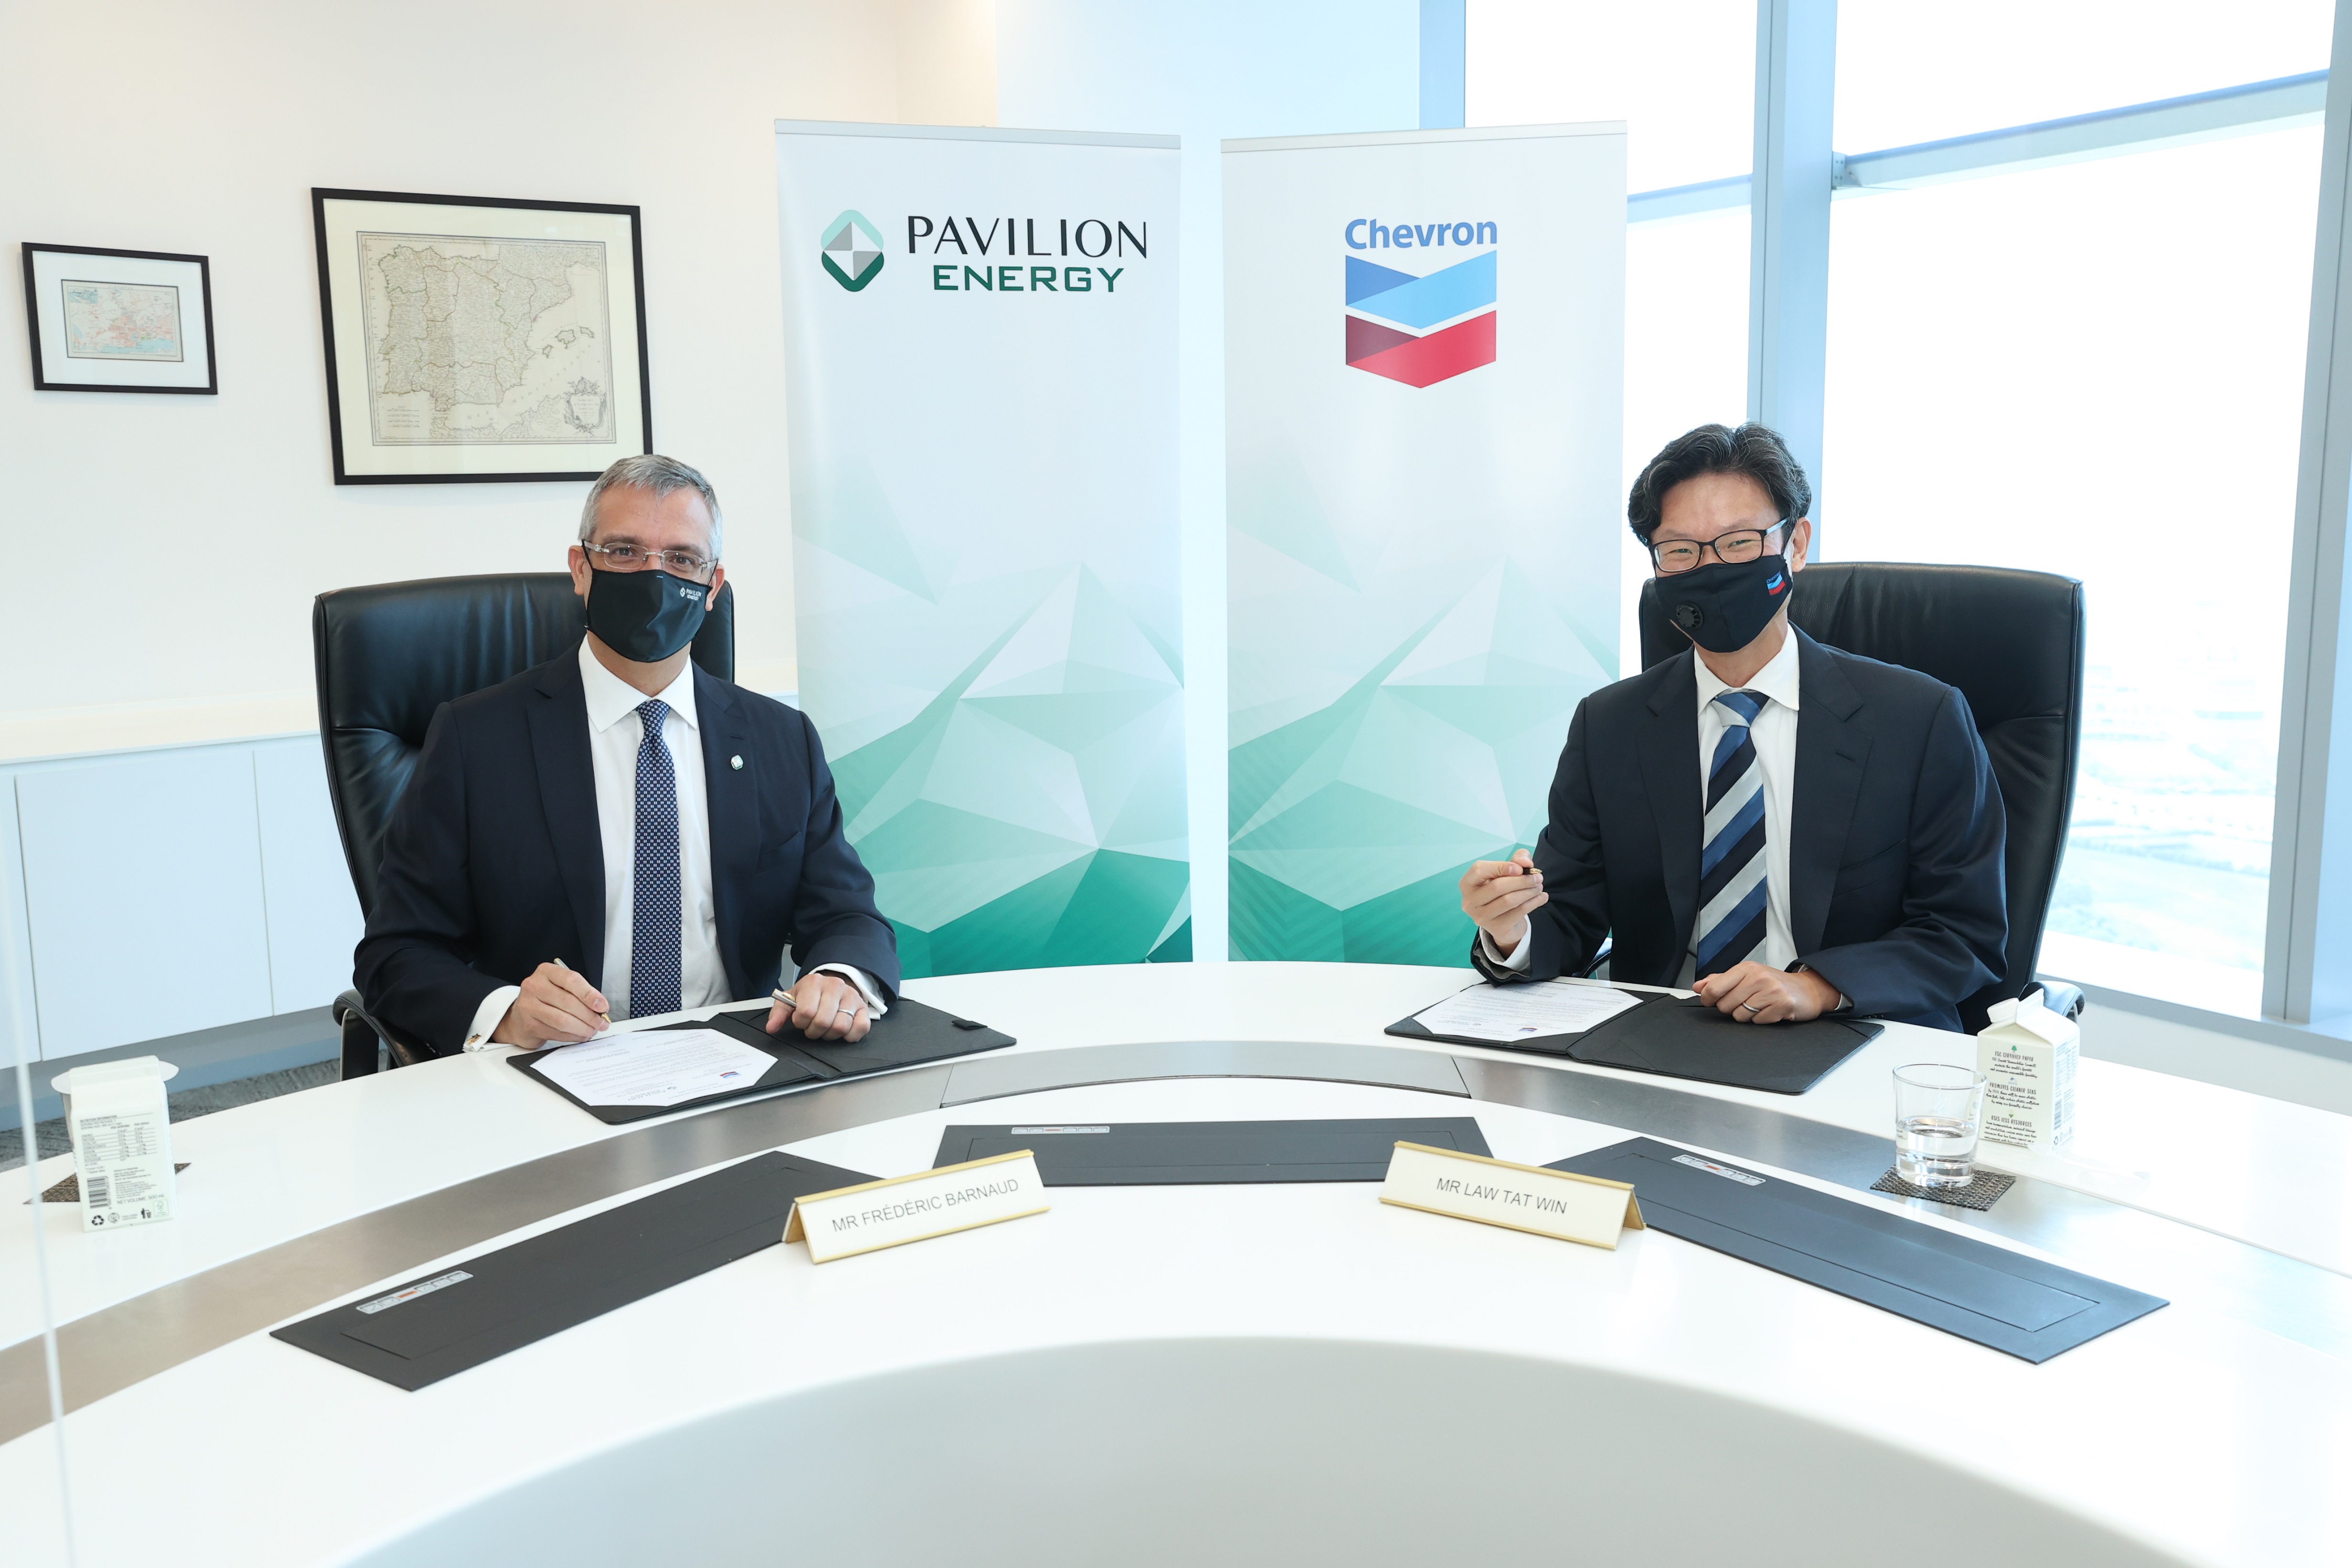 Pavilion Energy pens LNG supply deal with Chevron